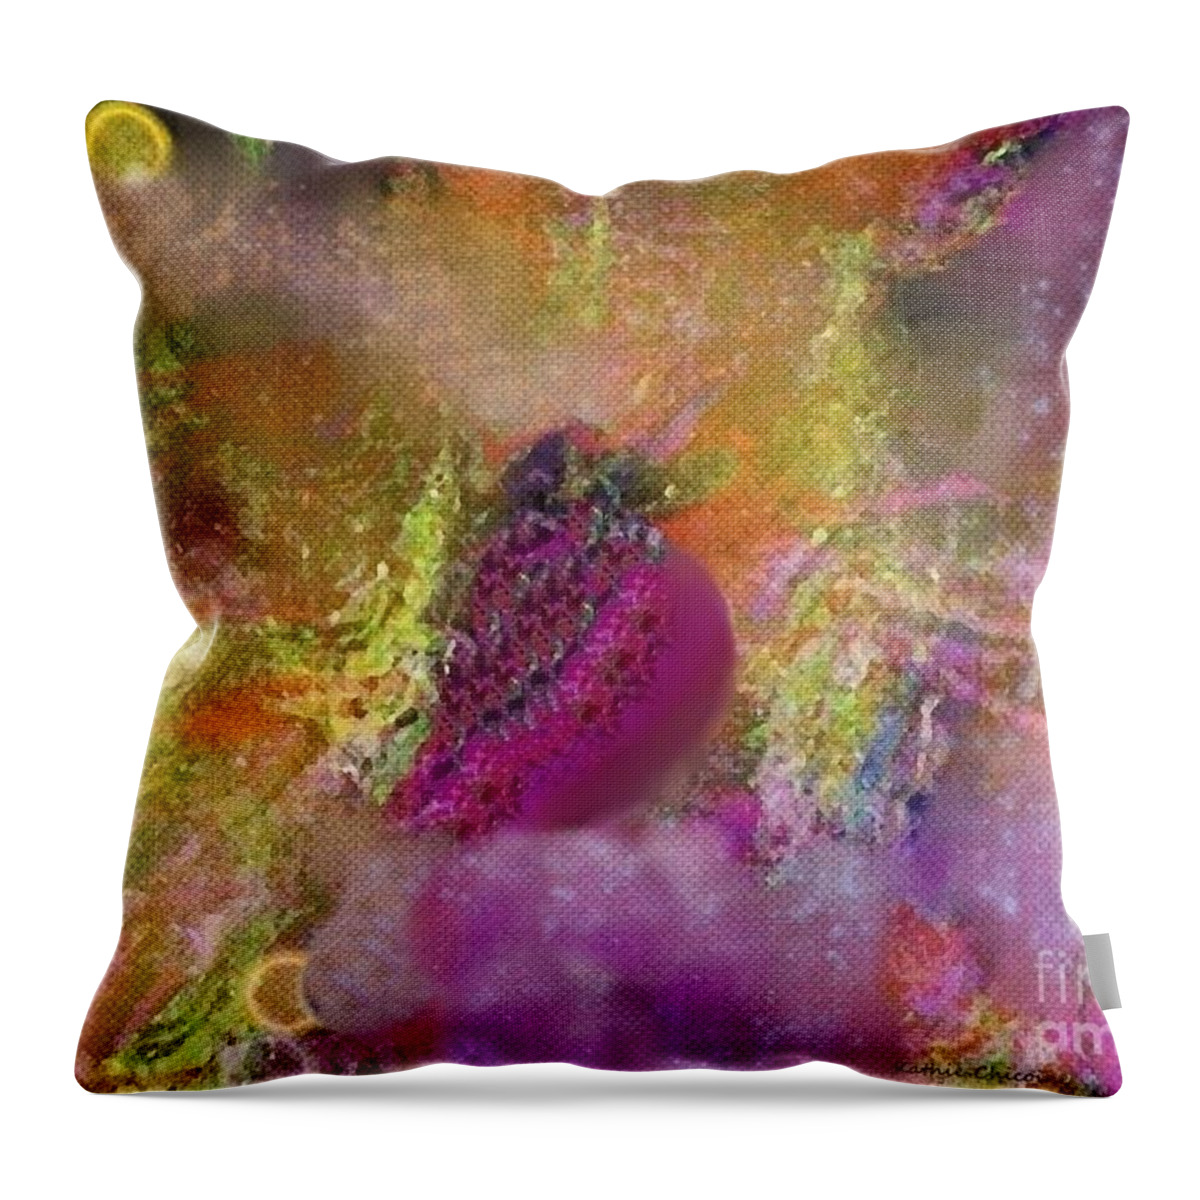 Photography Throw Pillow featuring the photograph Hidden Jewel by Kathie Chicoine